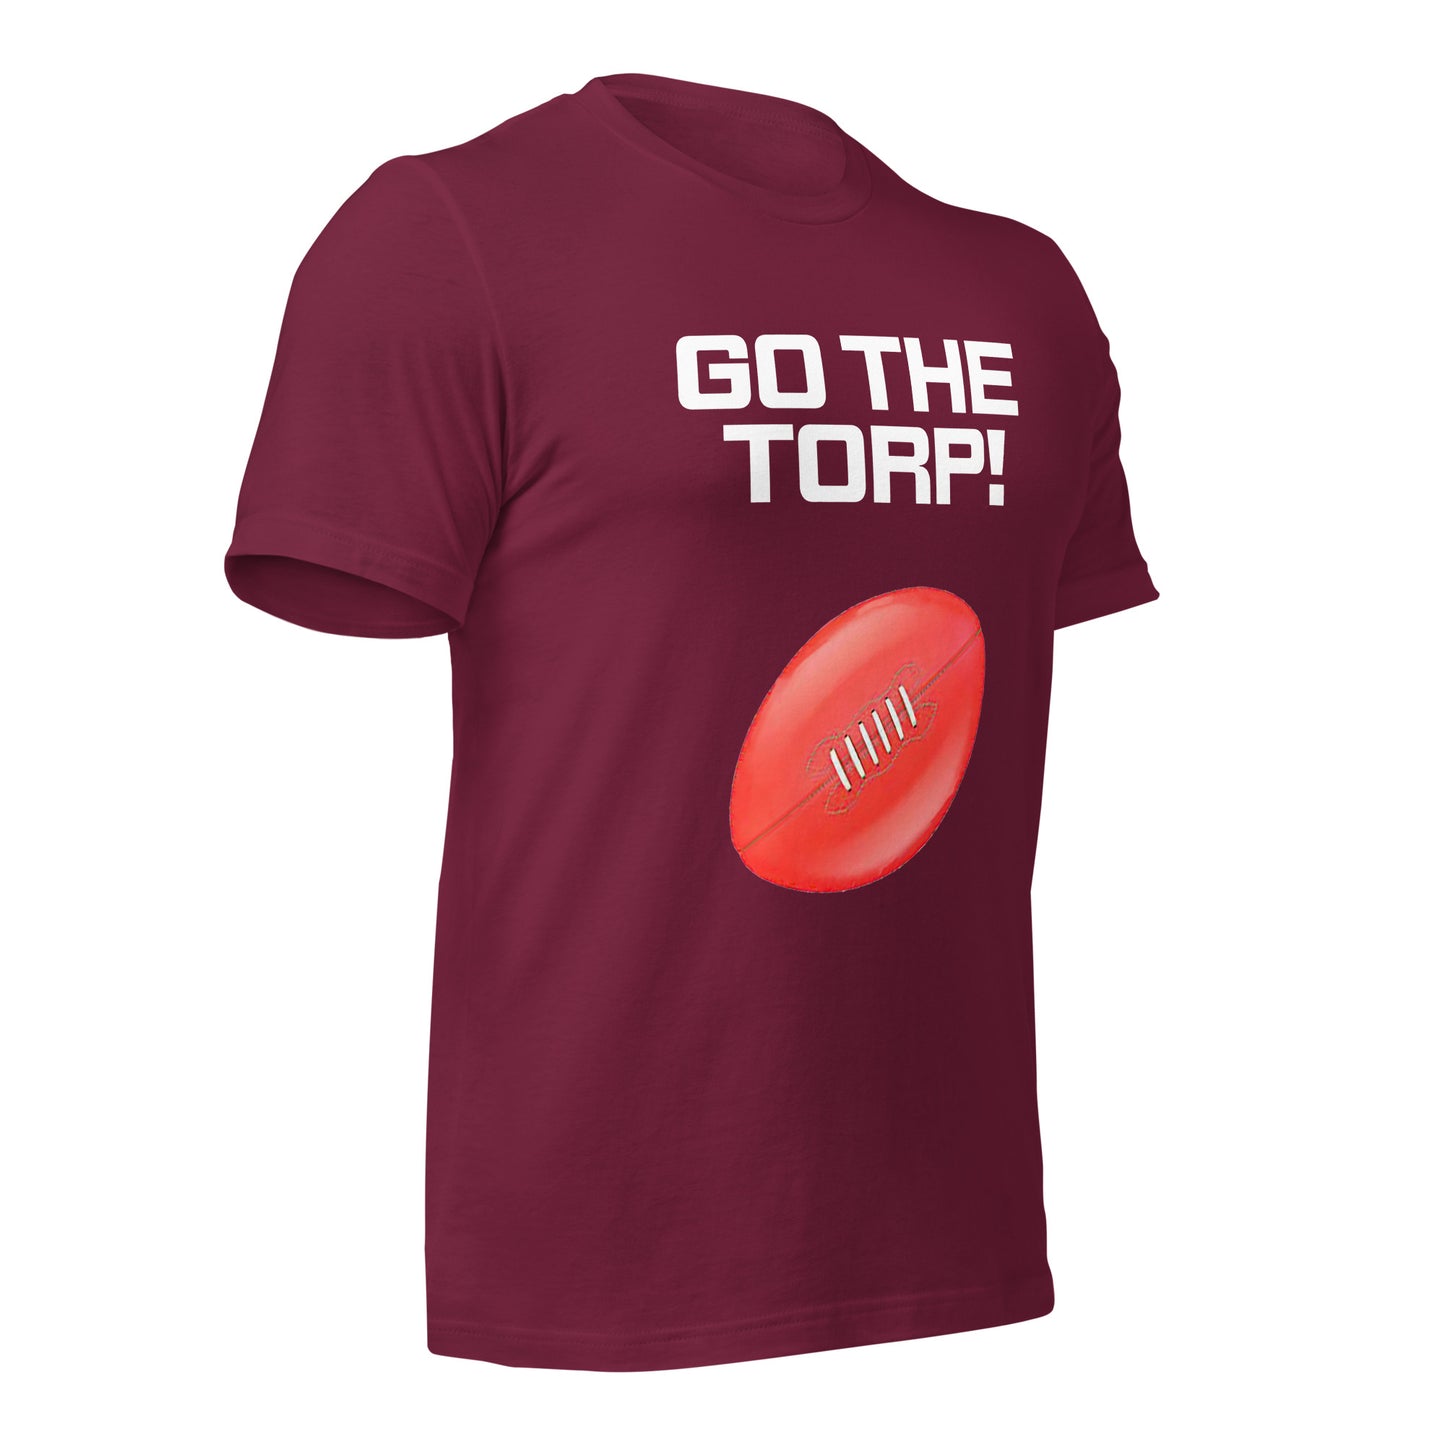 Go the Torp!